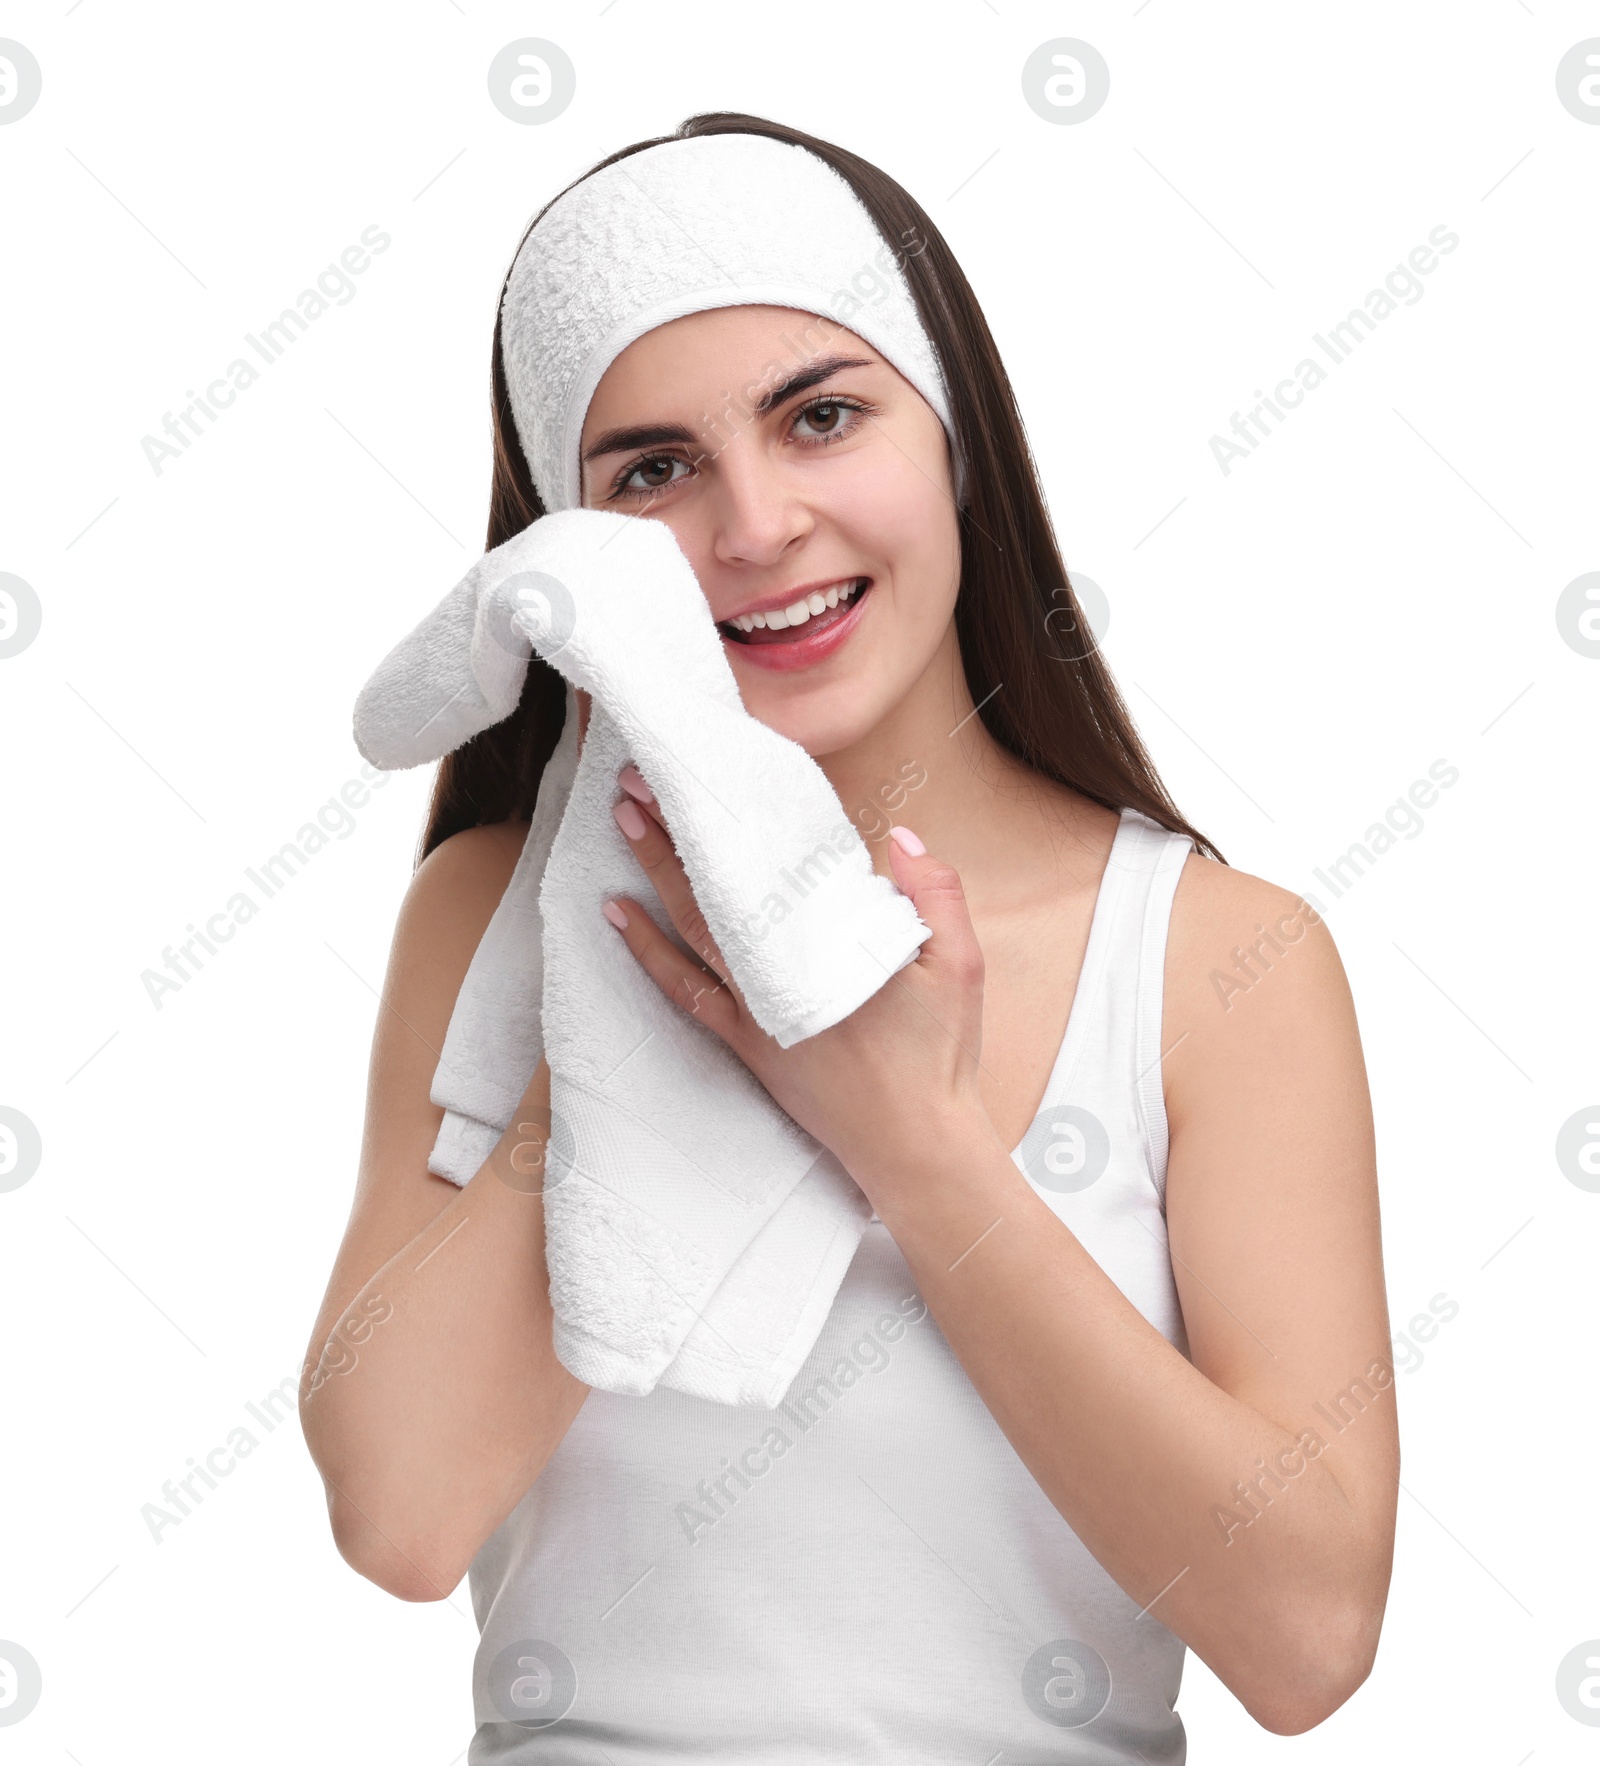 Photo of Washing face. Young woman with headband and towel on white background